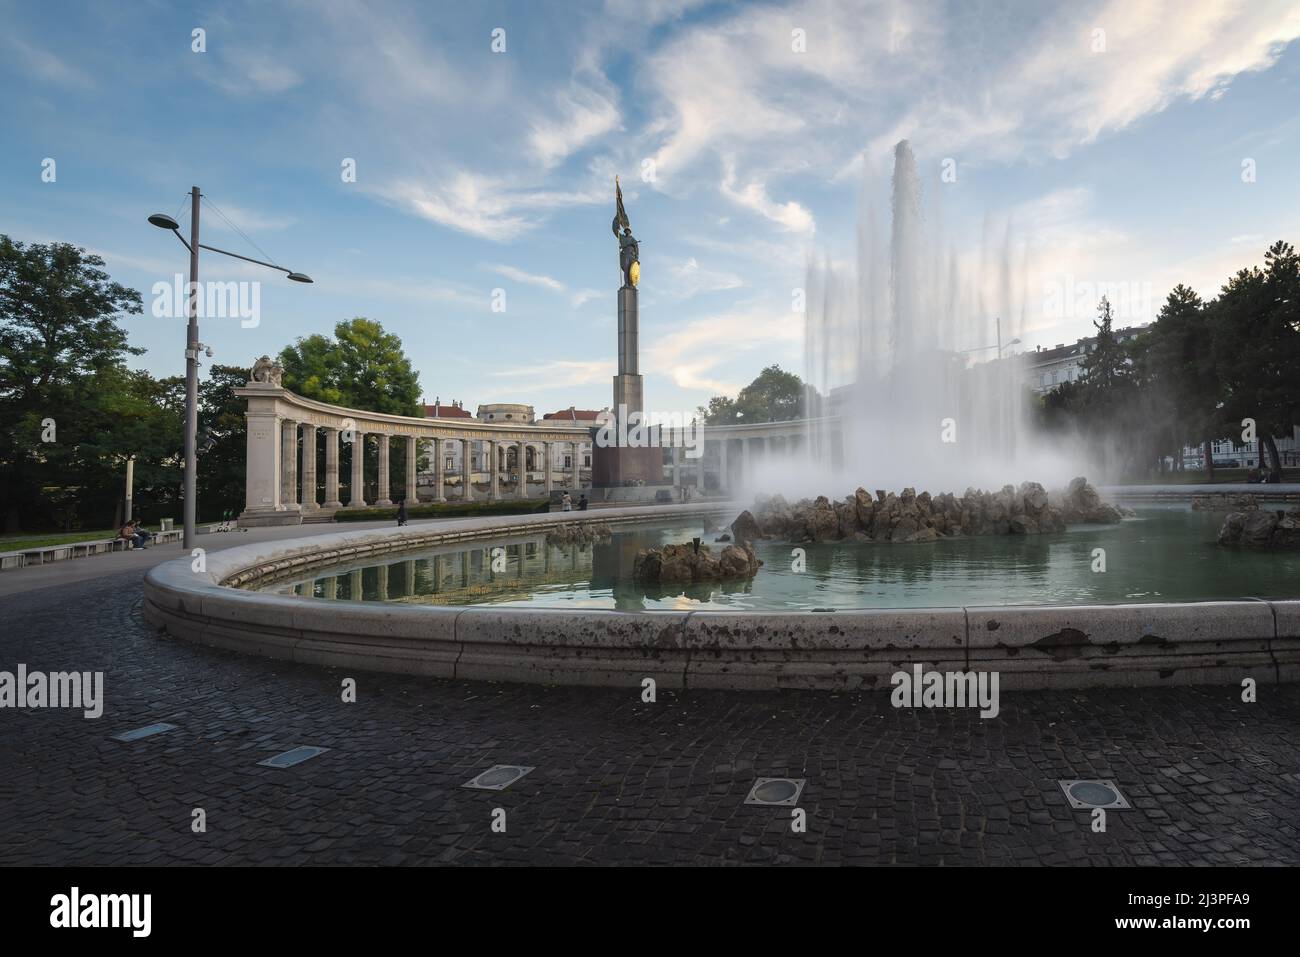 Hochstrahlbrunnen Fountain and Soviet War Memorial  - designed by S.G. Yakovlev and unveiled in 1945 - Vienna, Austria Stock Photo